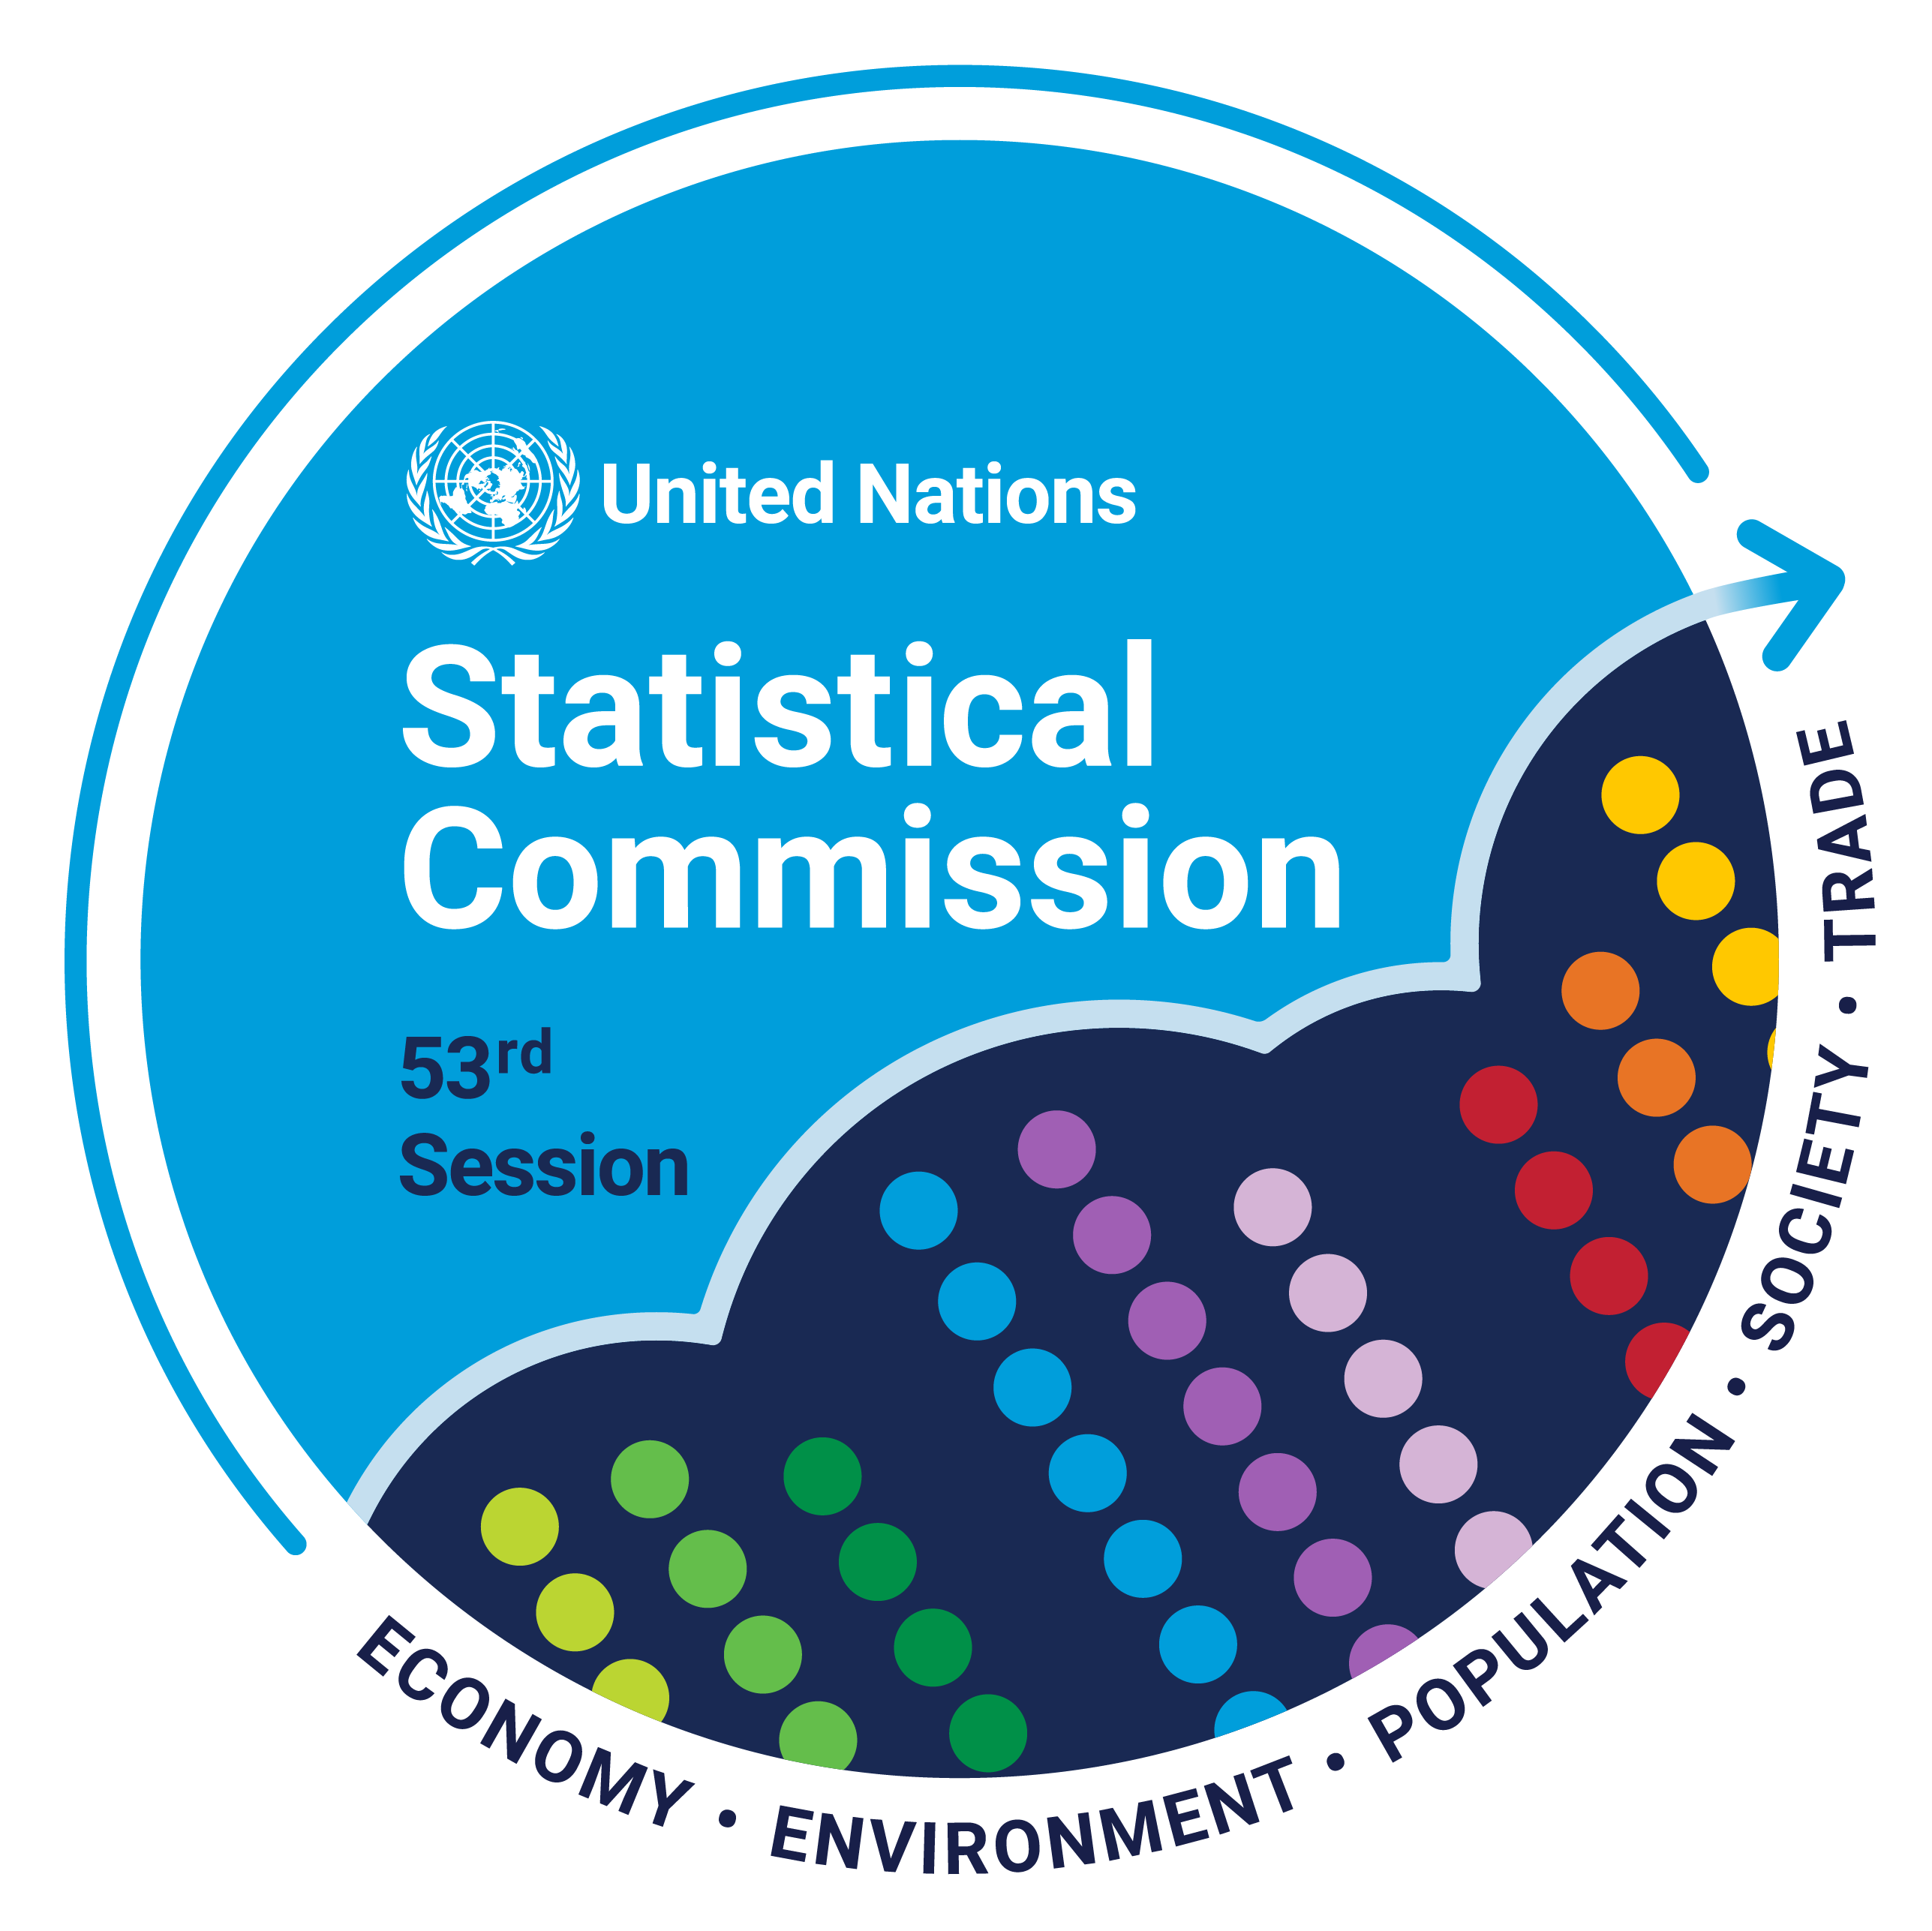 United Nations Statistical Commission 53rd Session